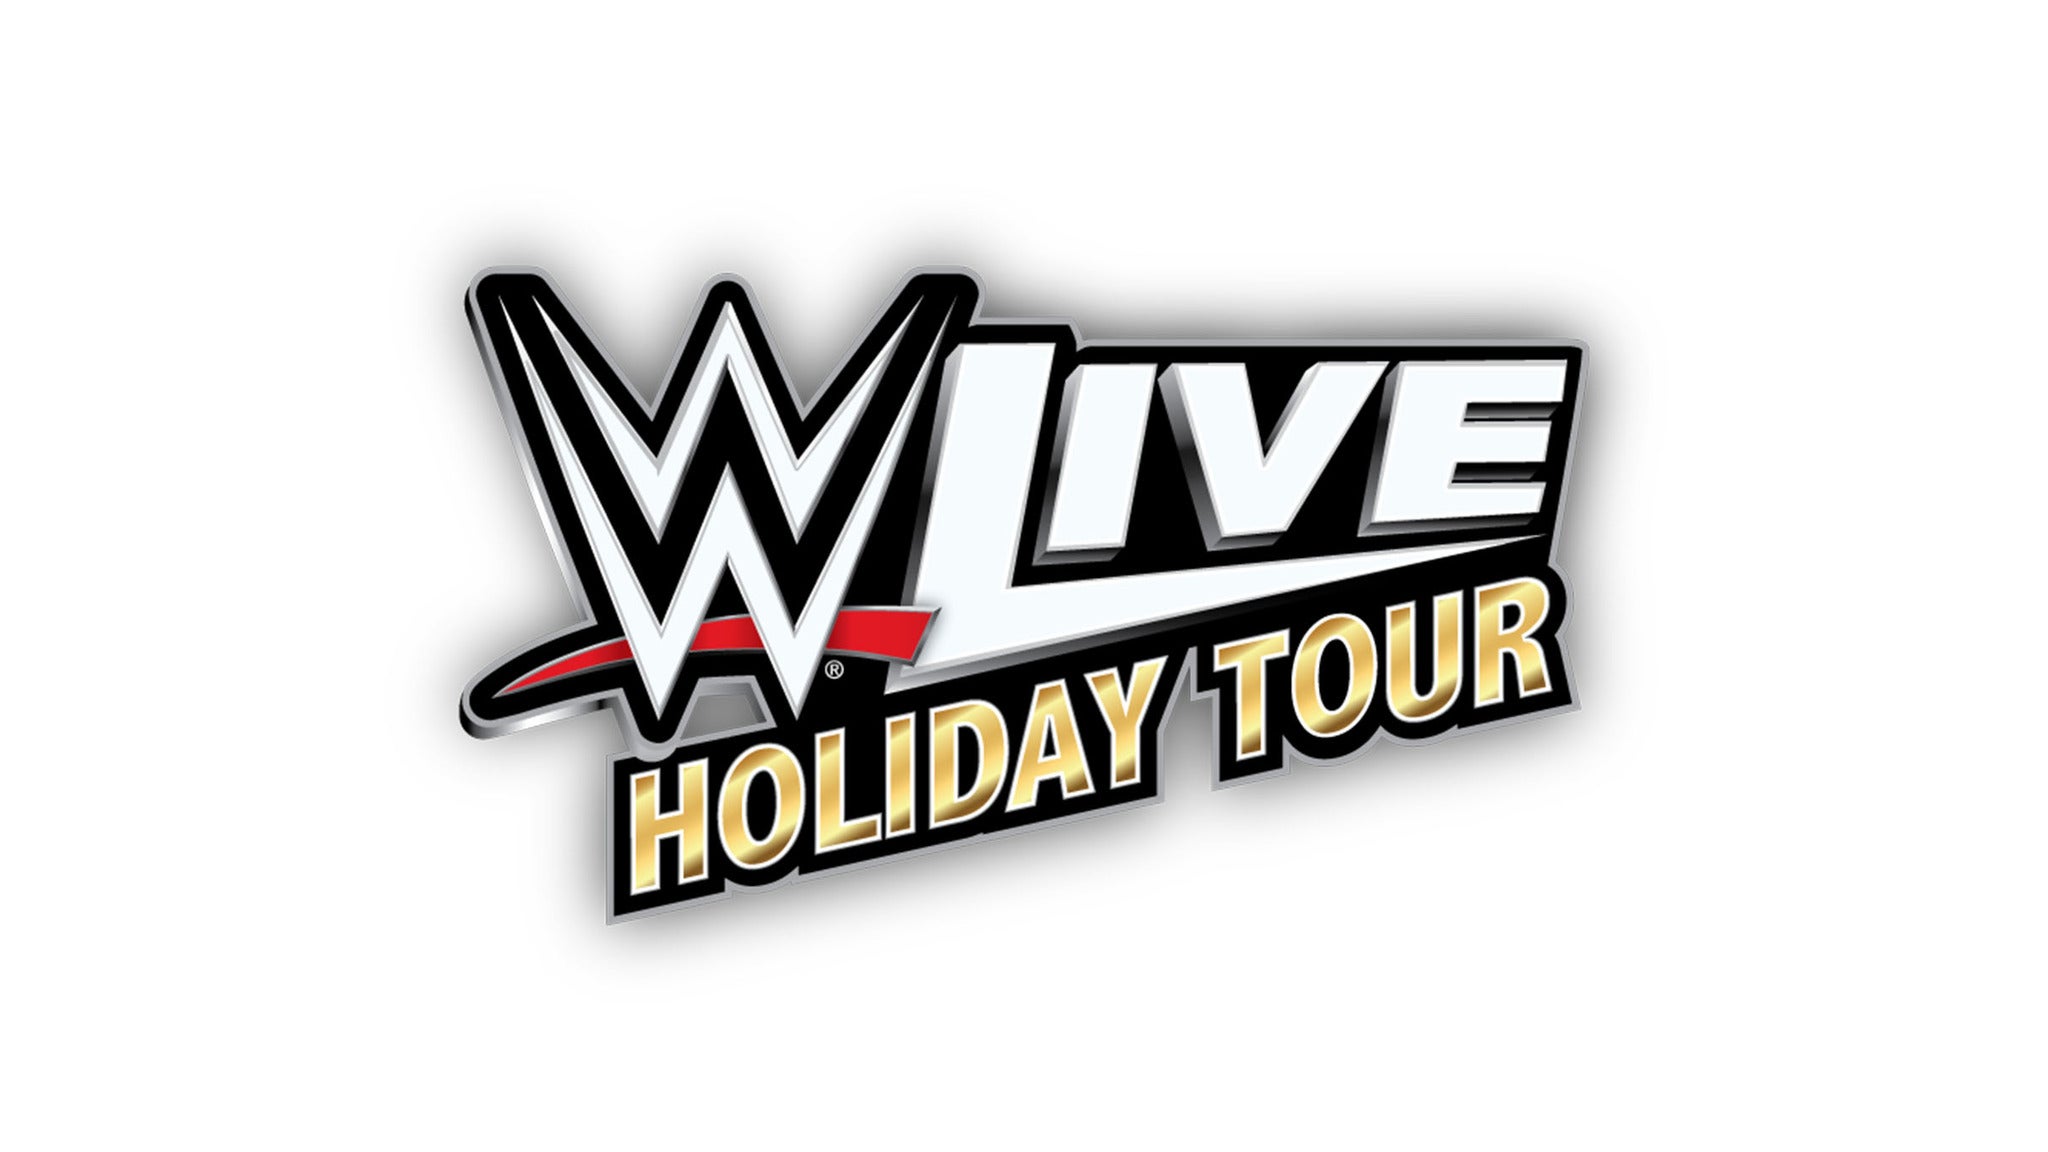 WWE Live Holiday Tour in Anaheim promo photo for VIP Package presale offer code